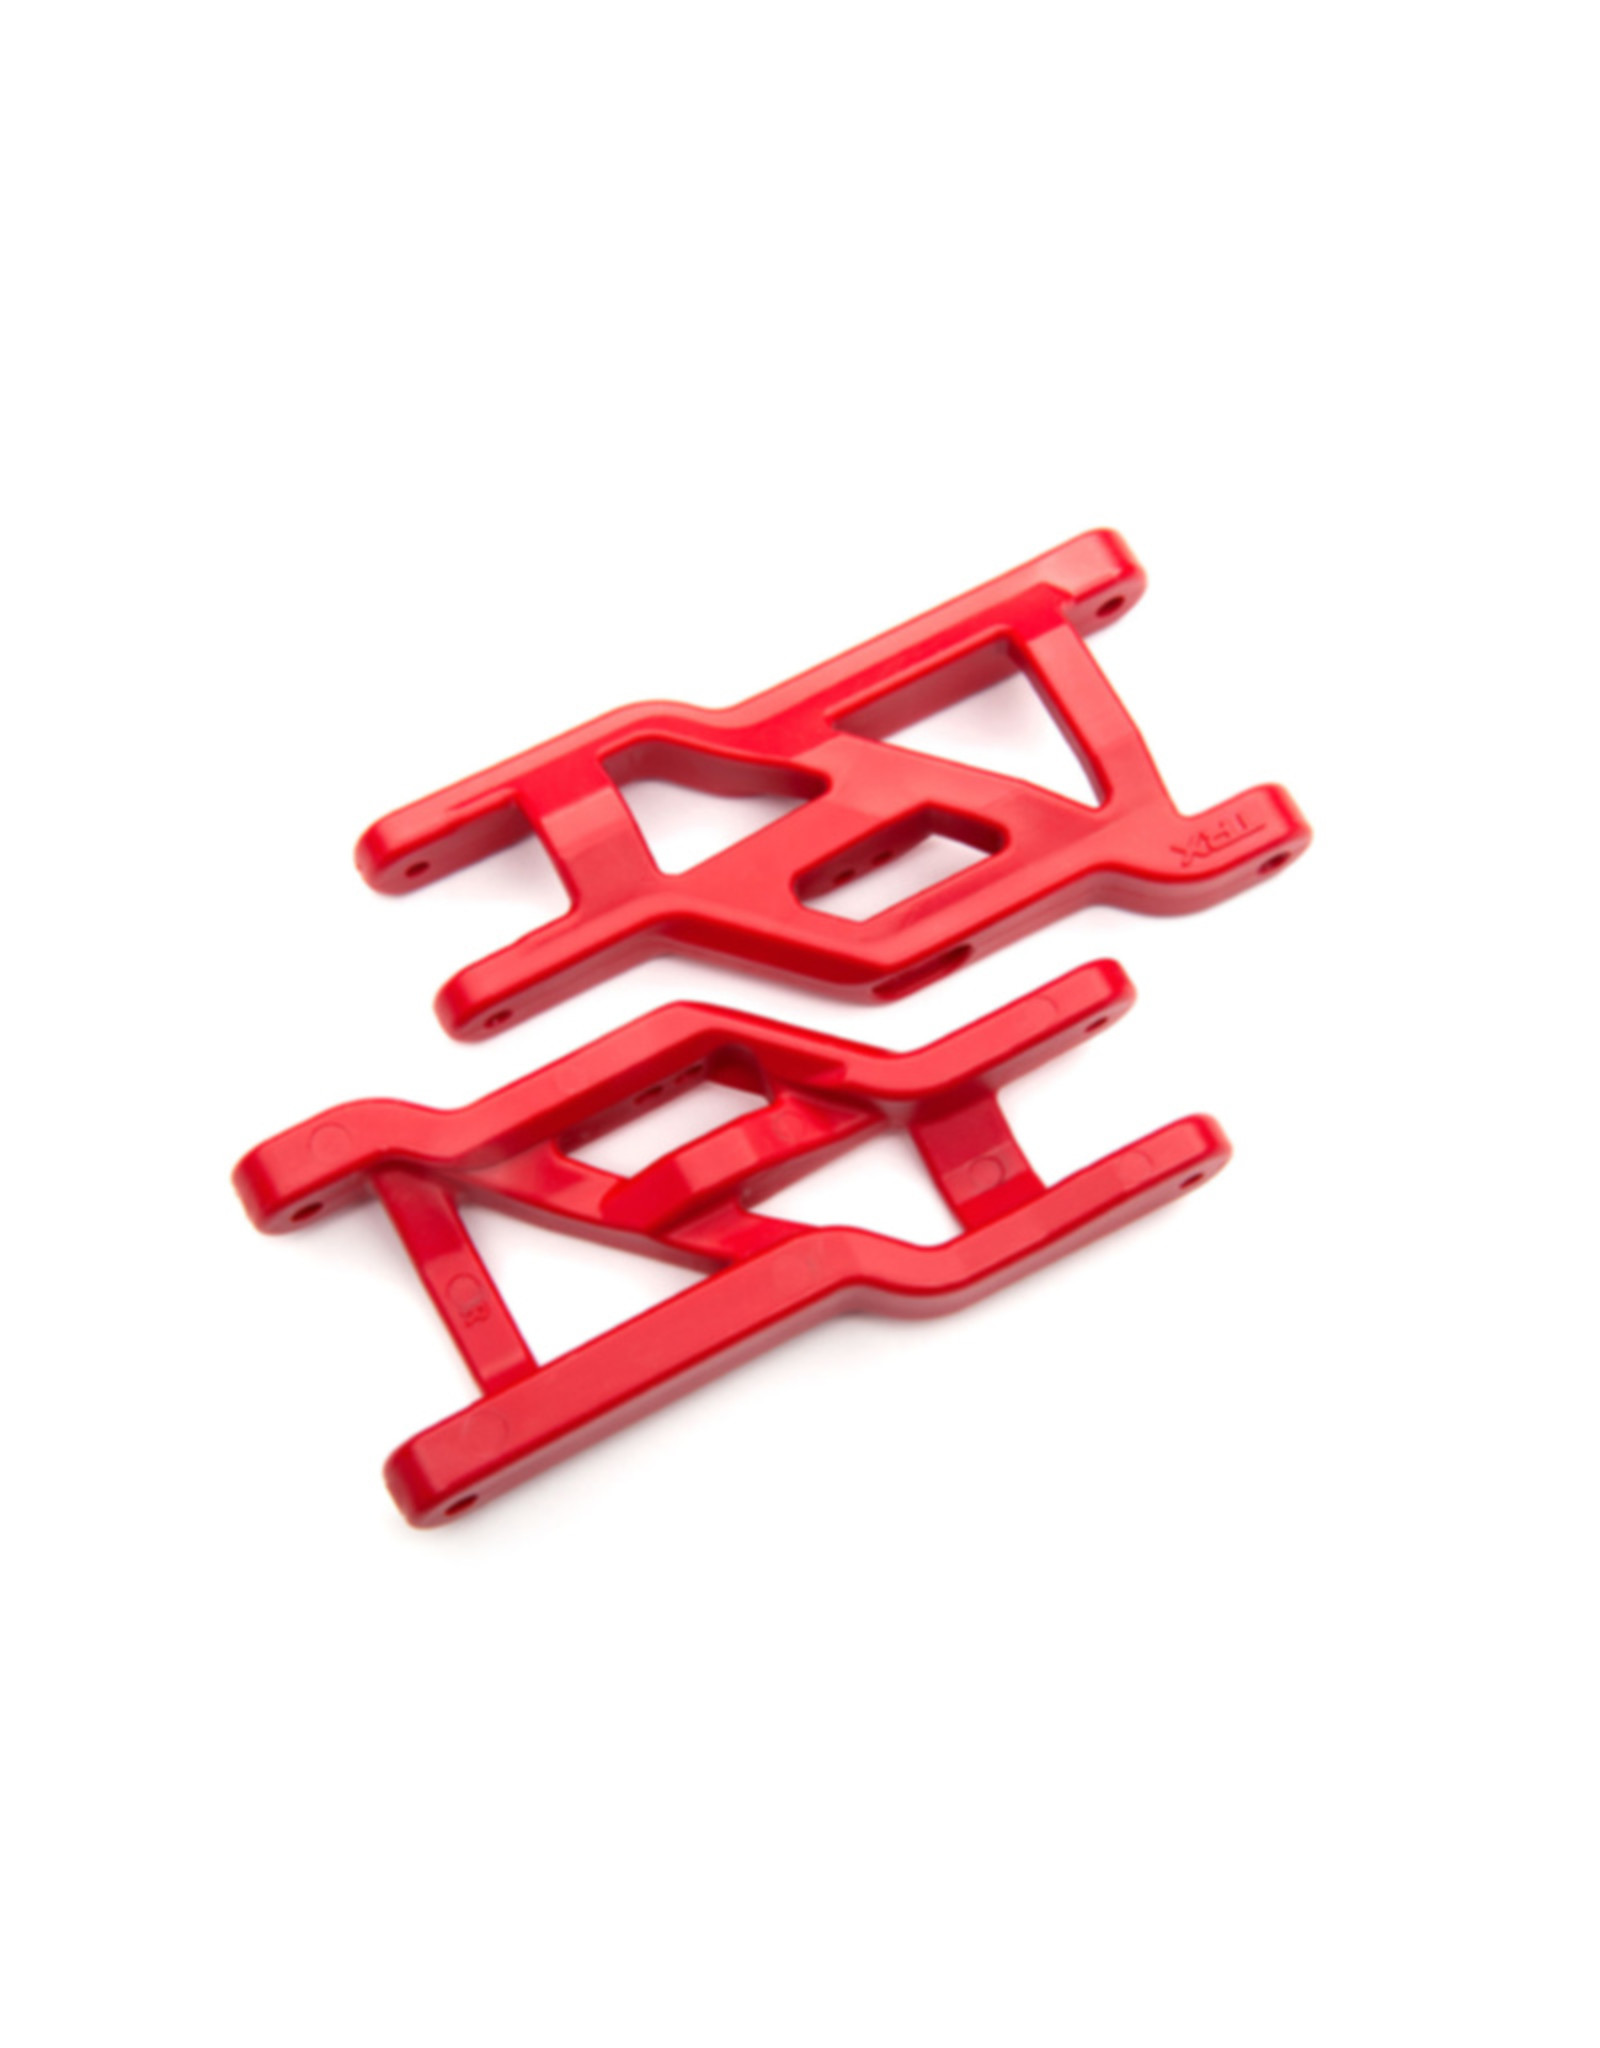 Traxxas TRA3631R SUSPENSION ARMS FRONT HD RED